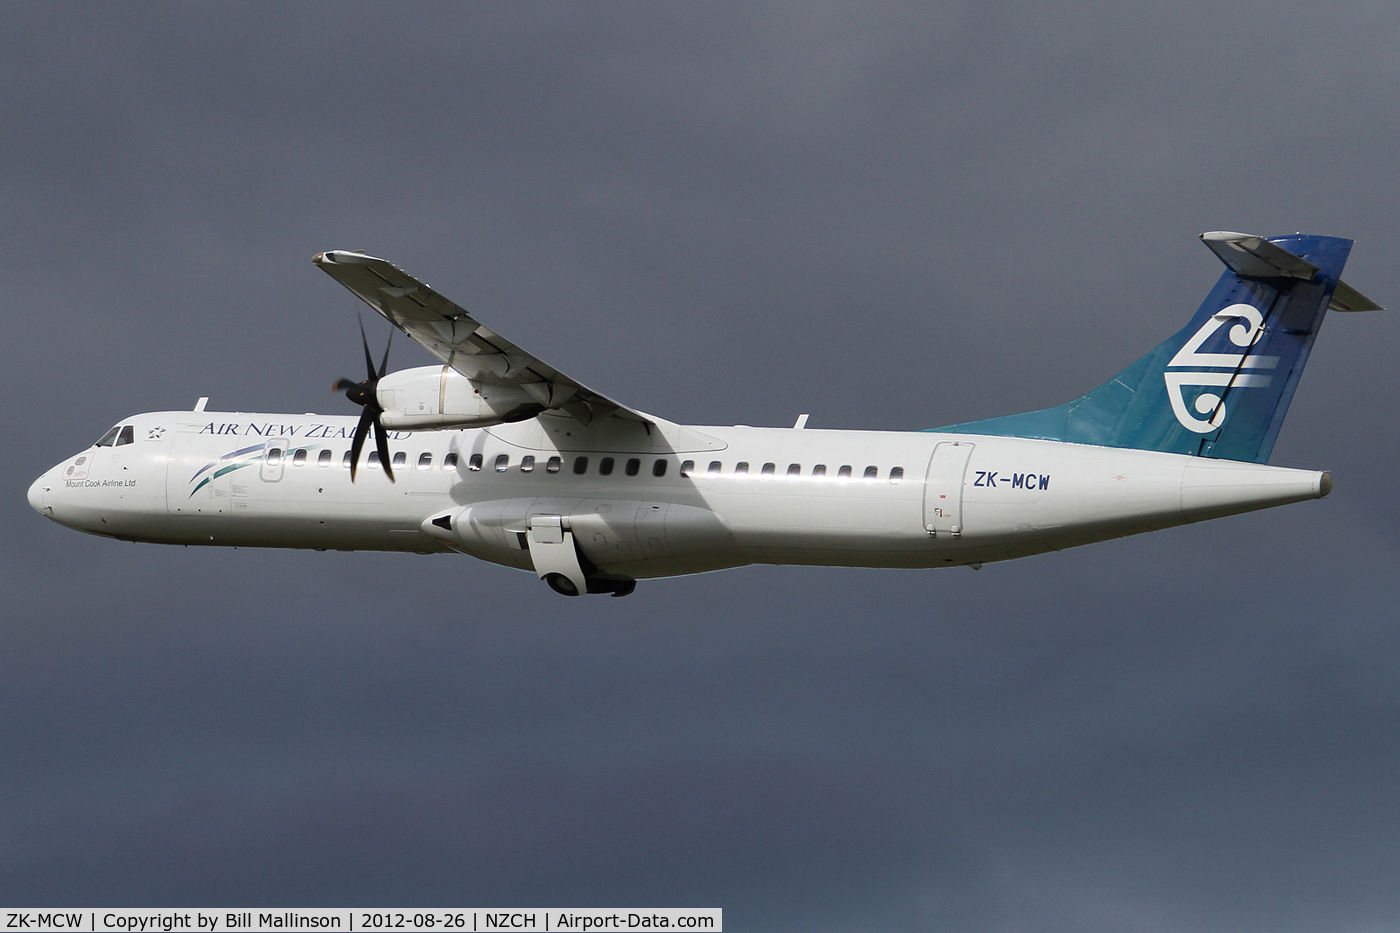 ZK-MCW, 2000 ATR 72-212A C/N 646, away from 02